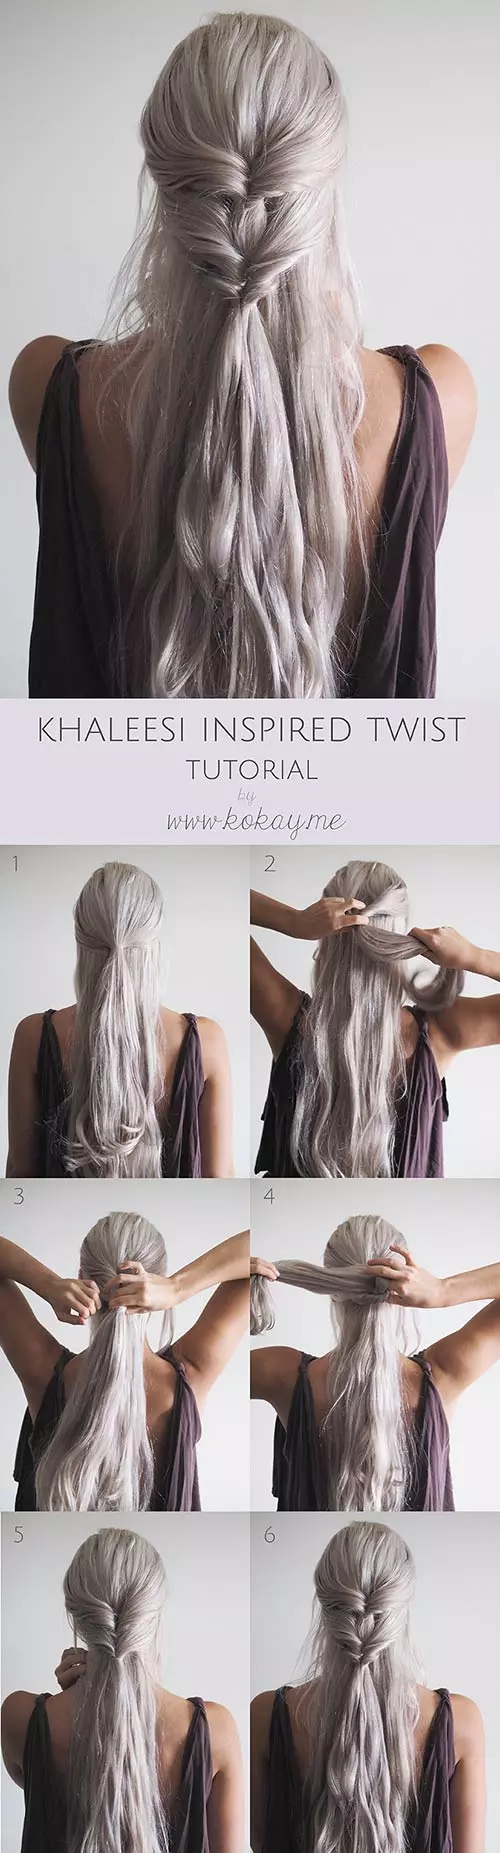 Khaleesi inspired twist hairstyle tutorial for girls with long hair